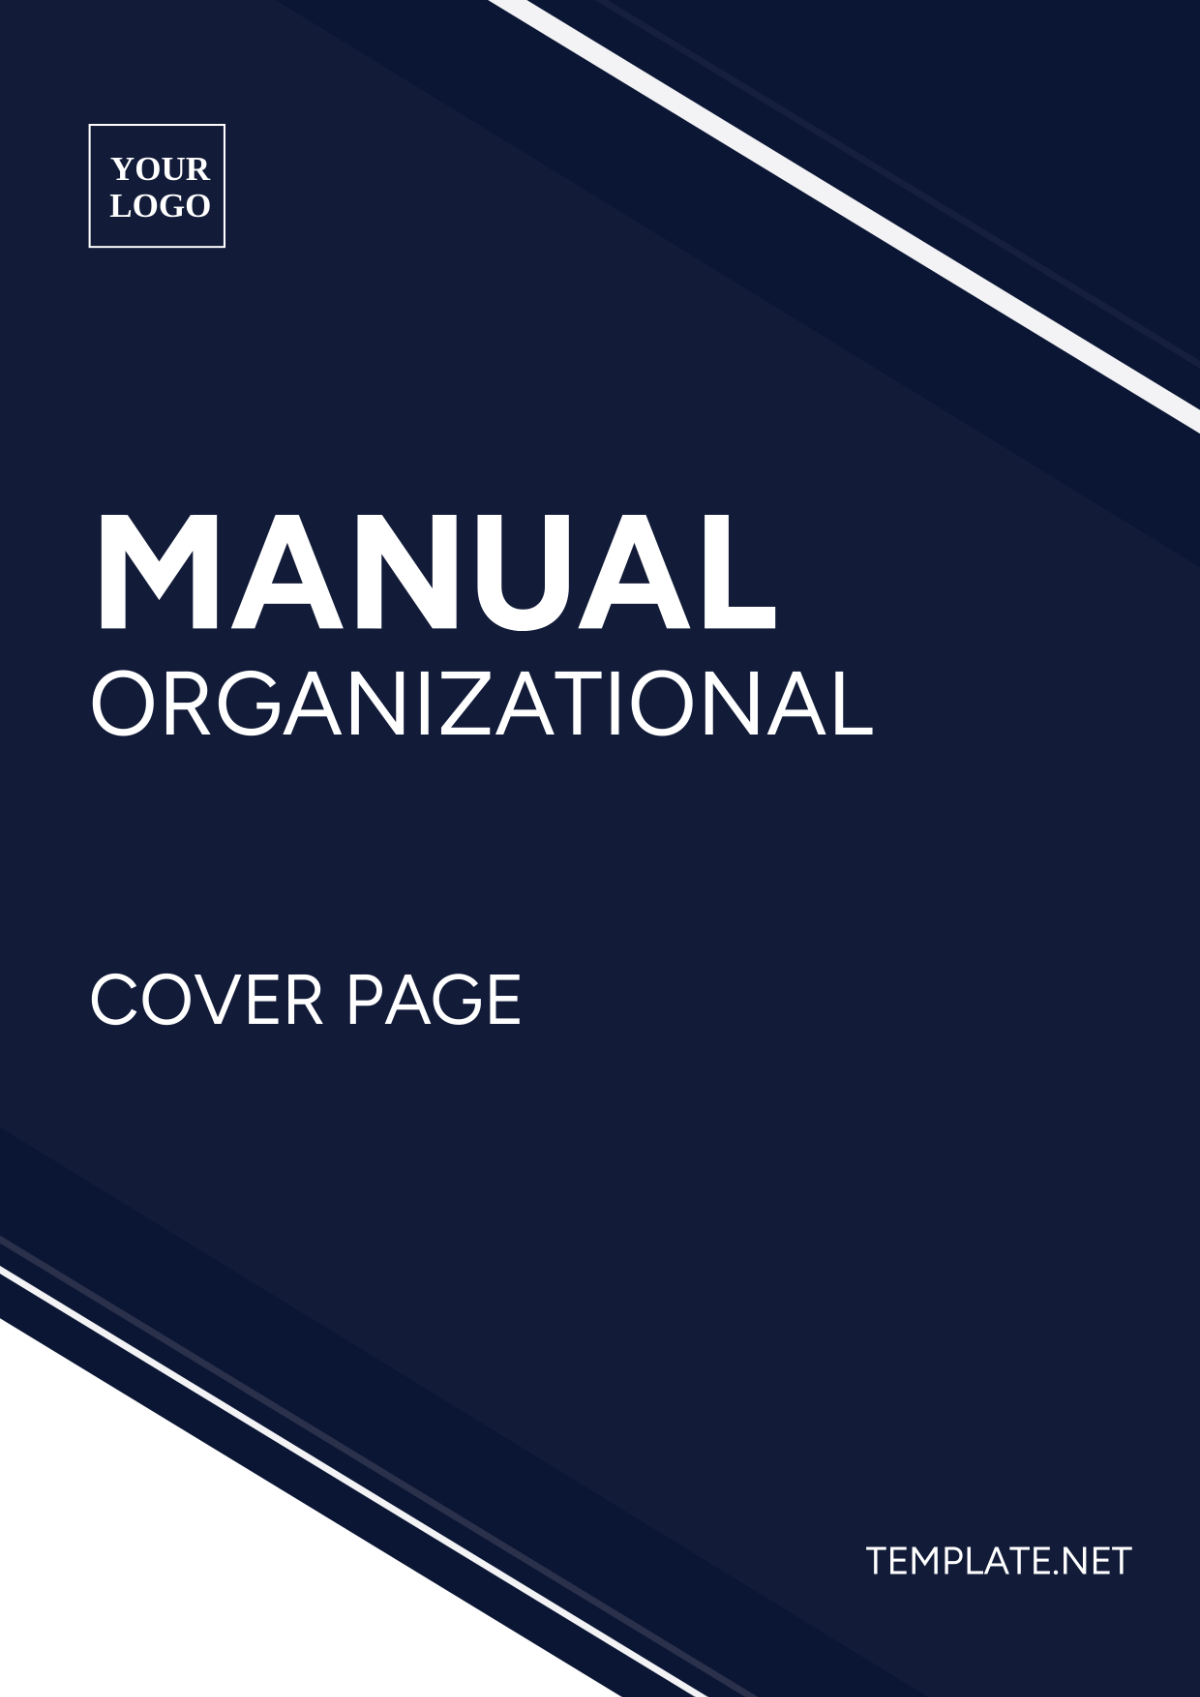 Manual Organizational Cover Page